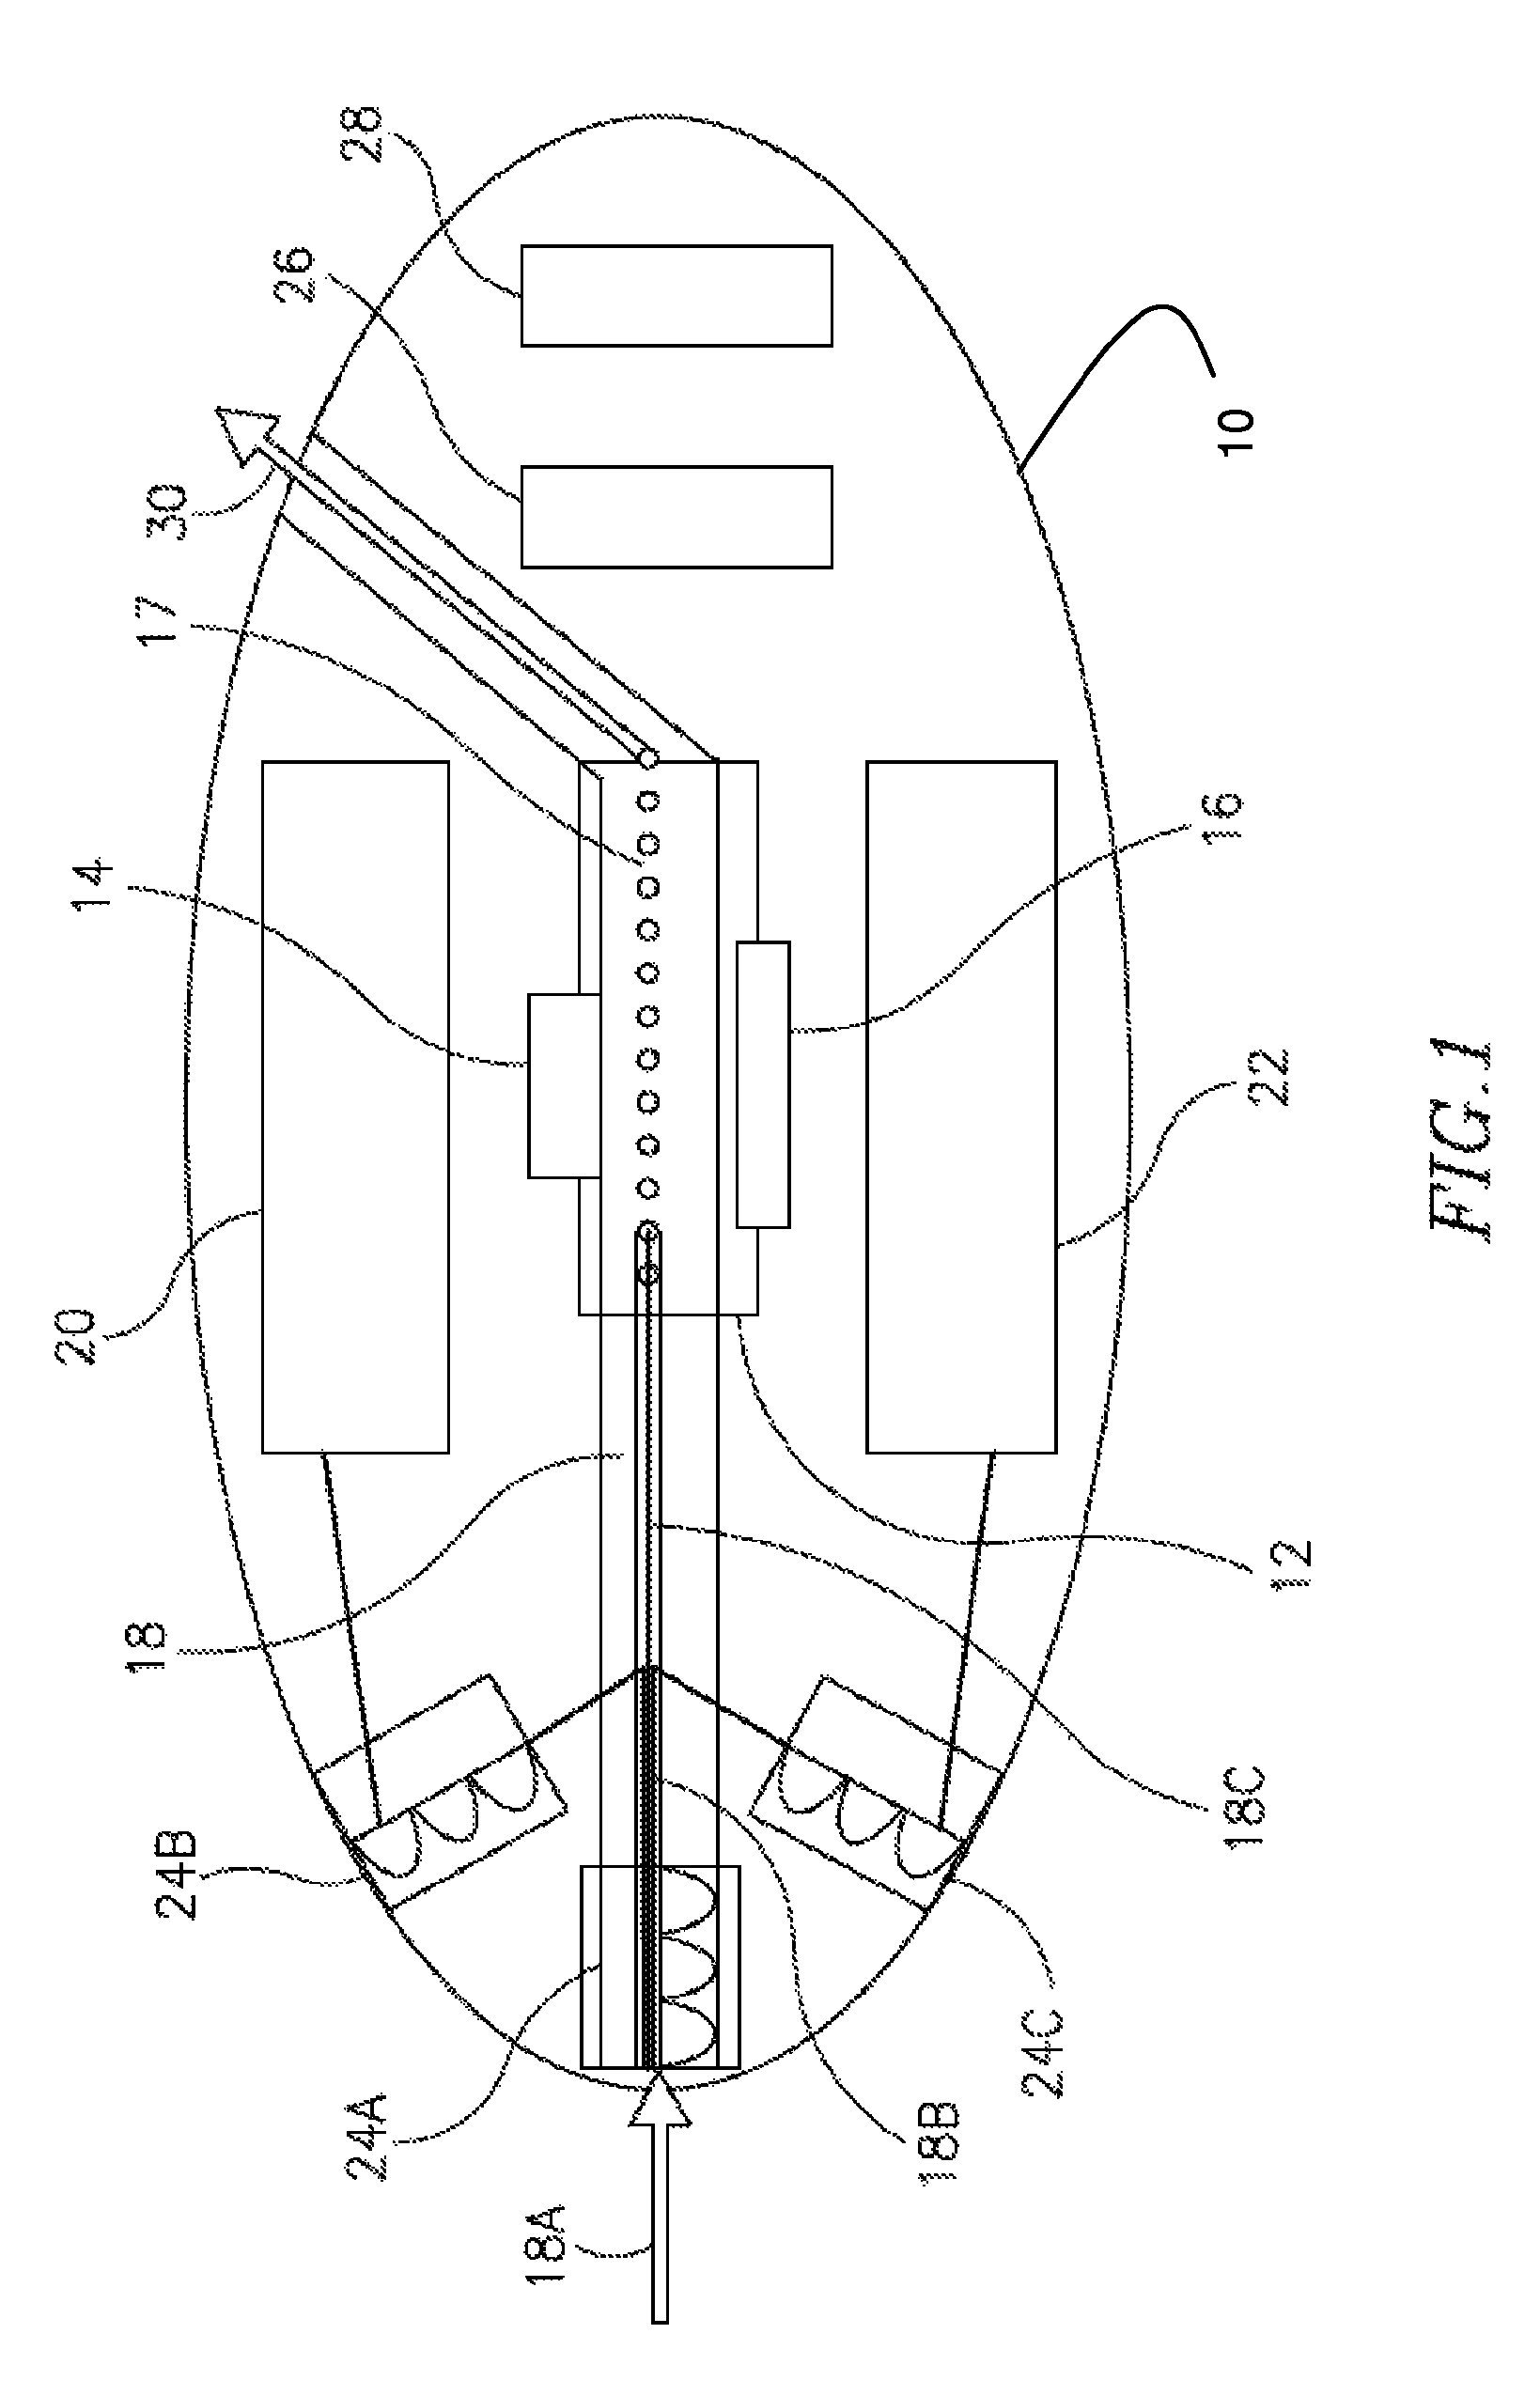 Device, system, and method for in-vivo analysis